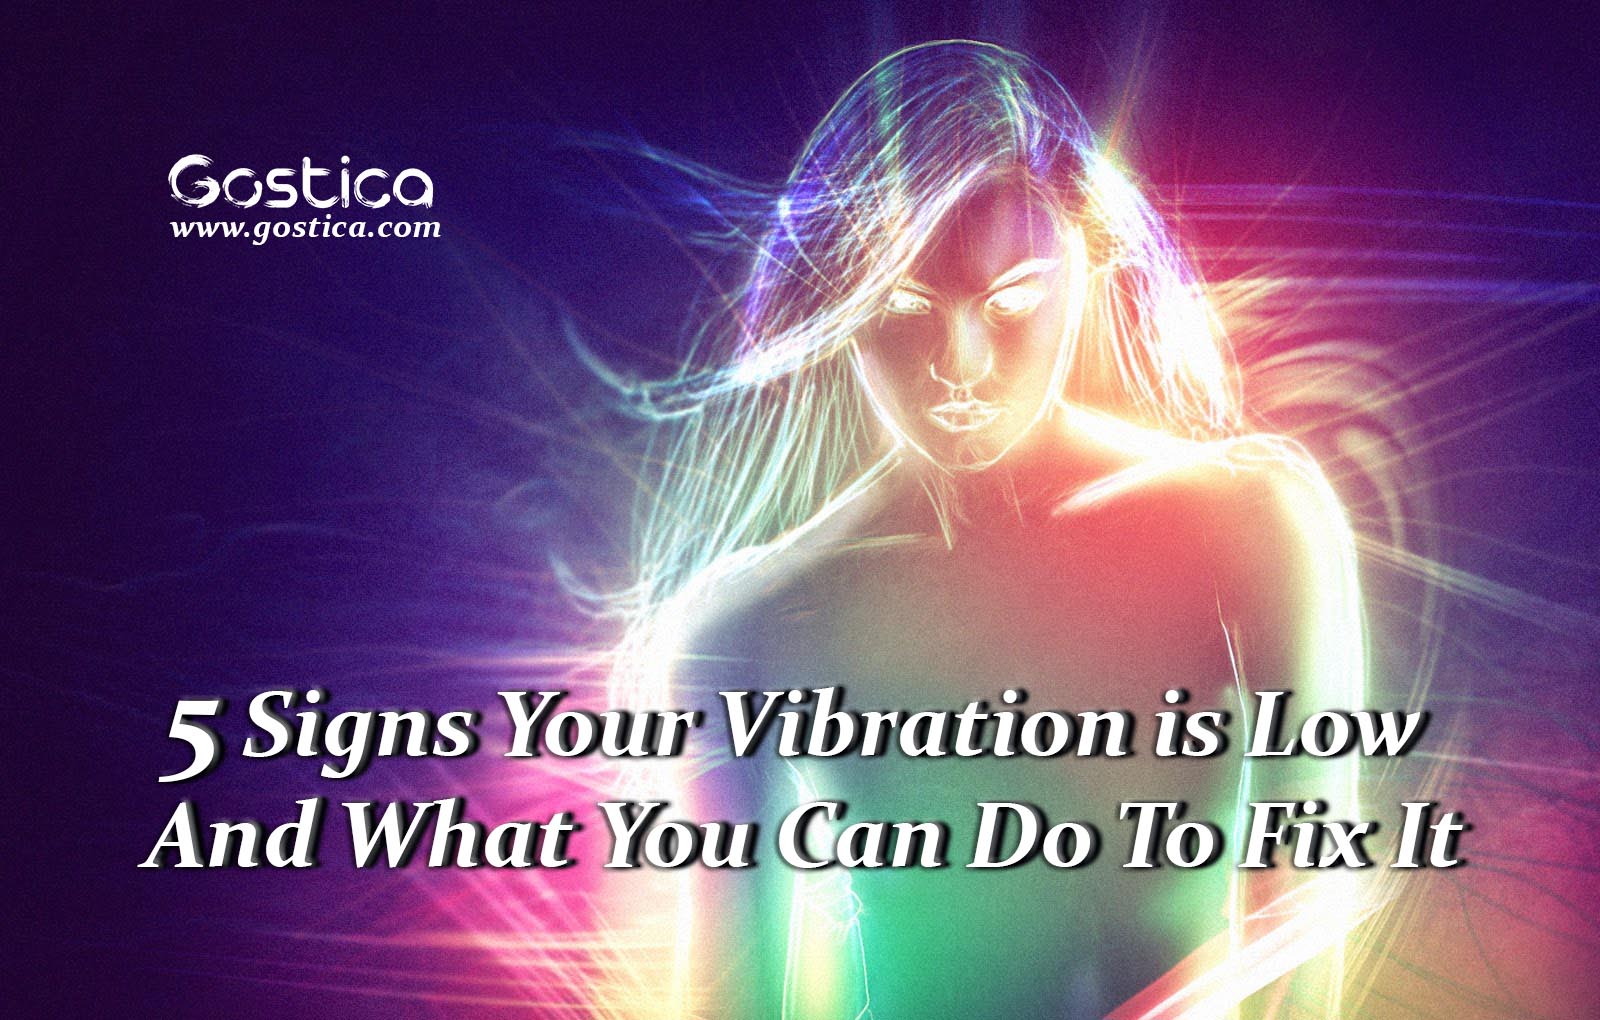 5-Signs-Your-Vibration-is-Low-And-What-You-Can-Do-To-Fix-It.jpg